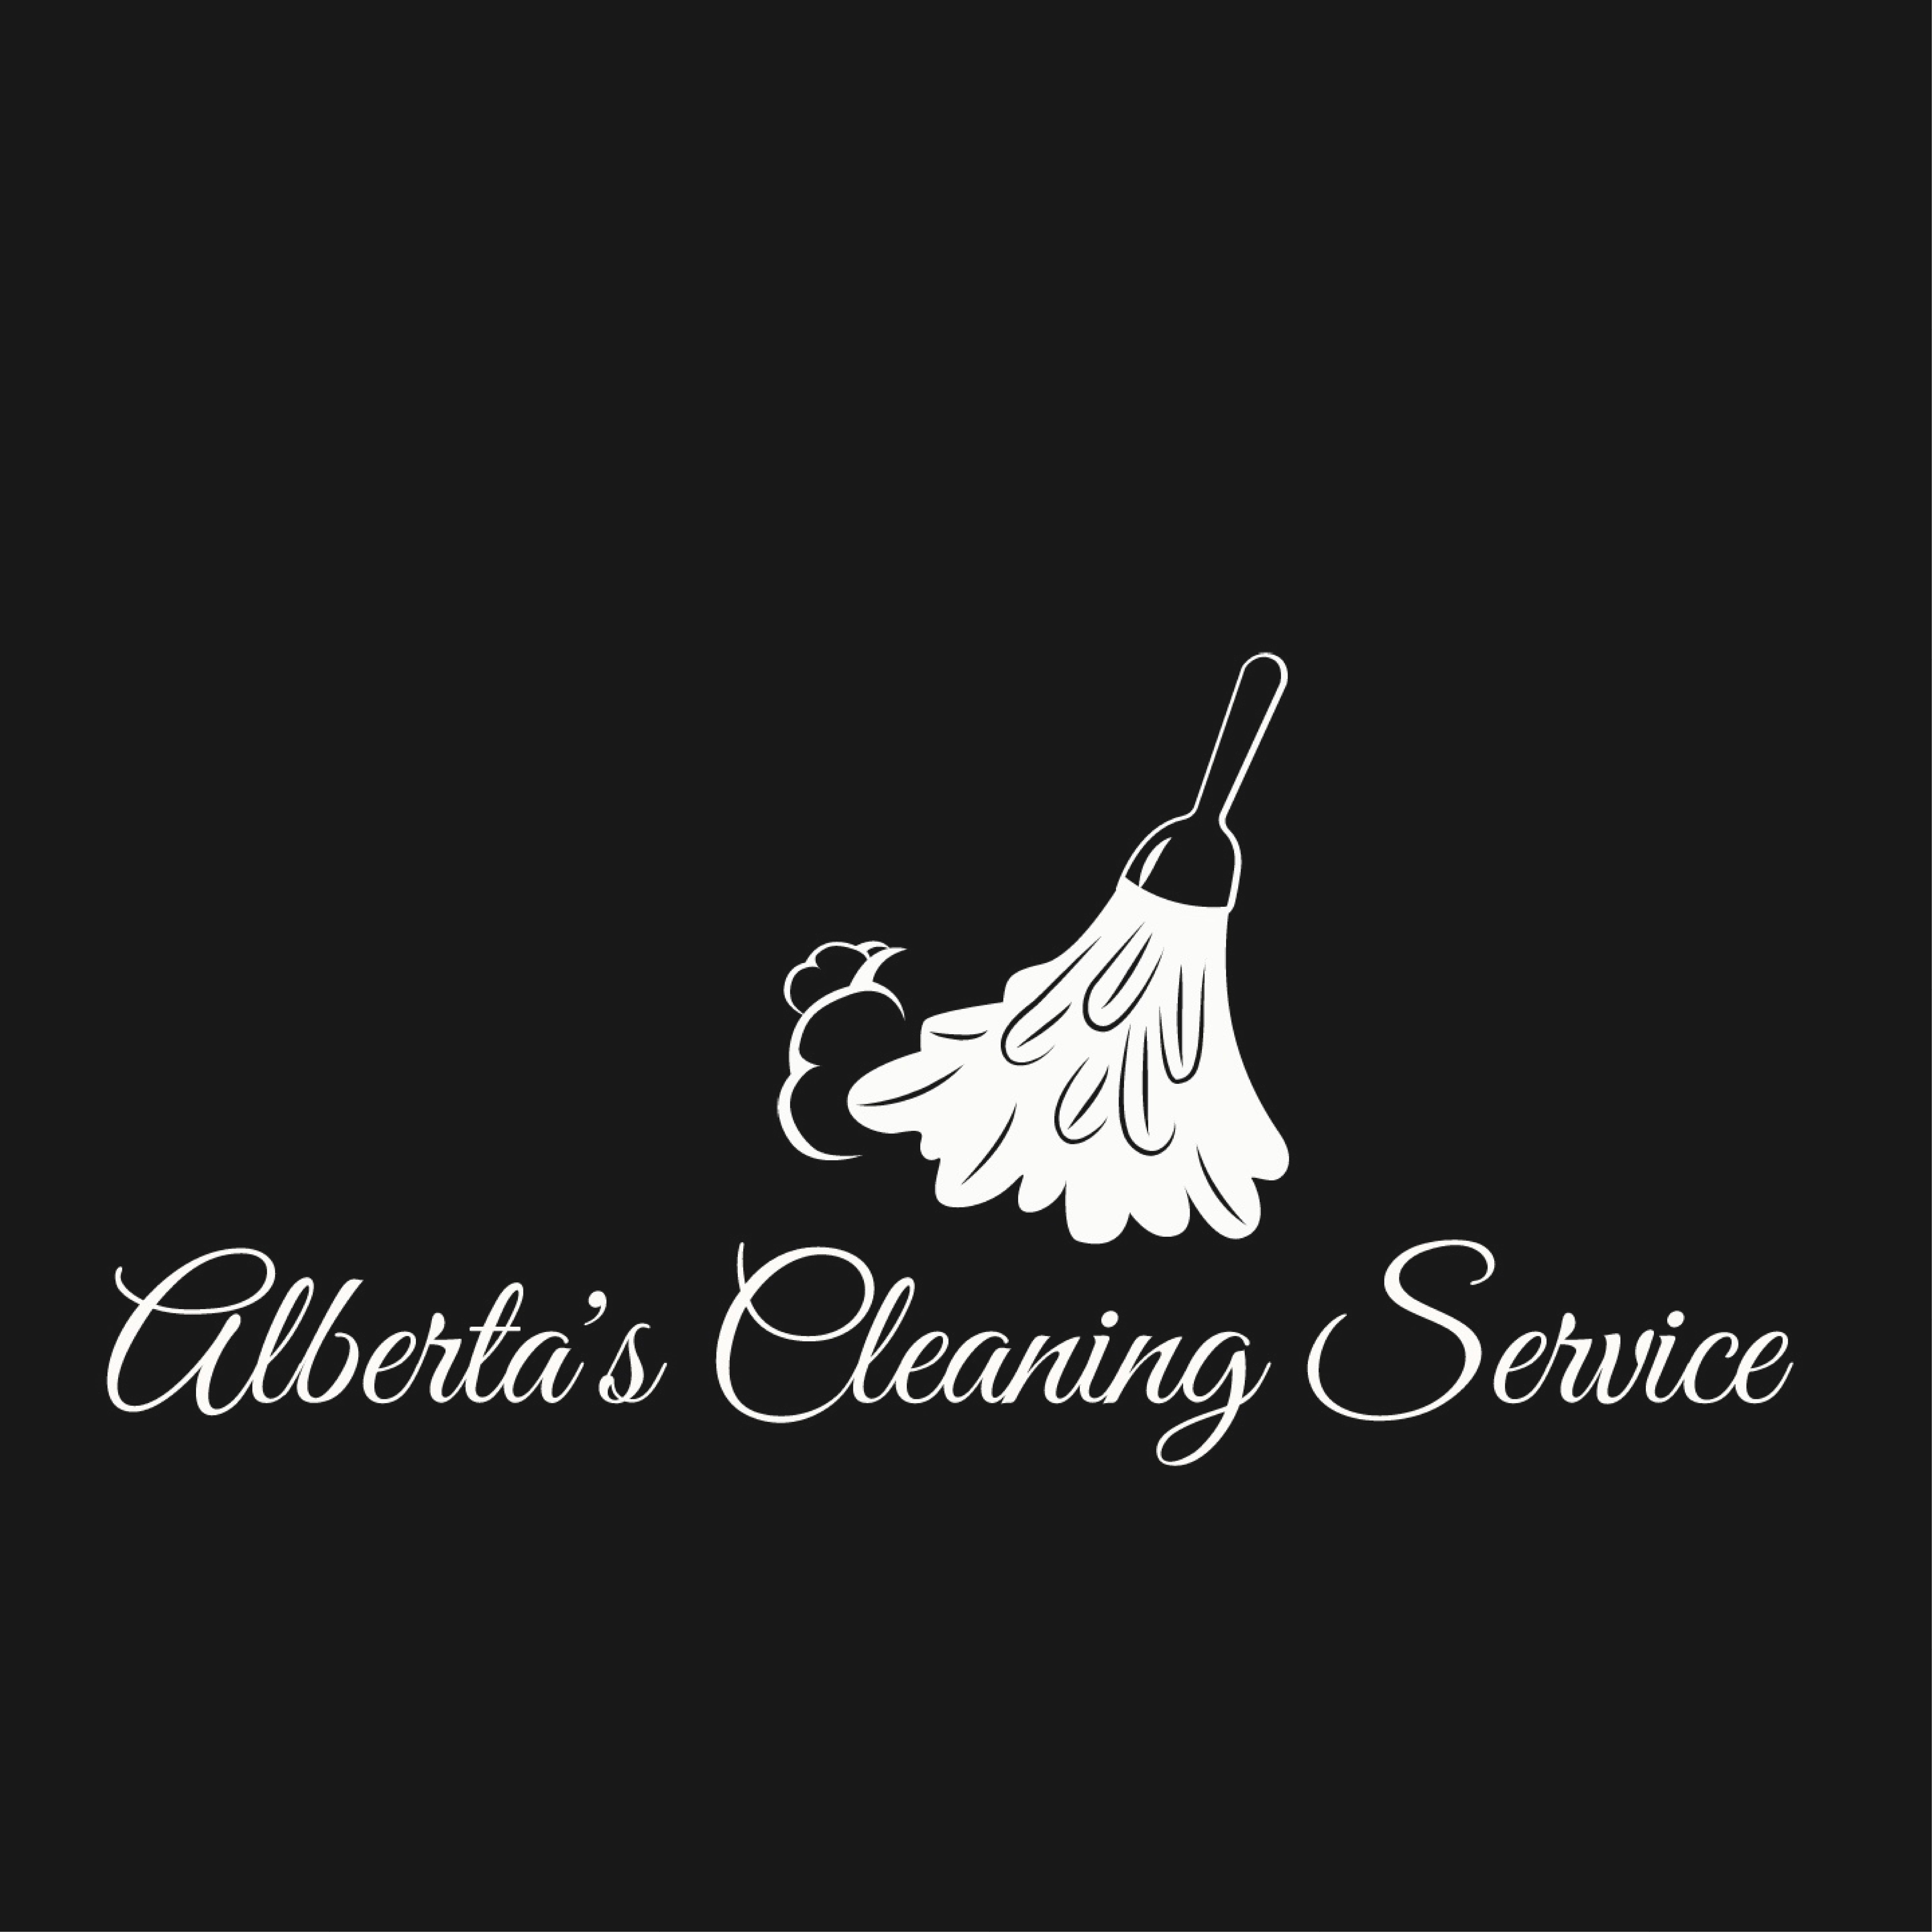 Albertas cleaning service